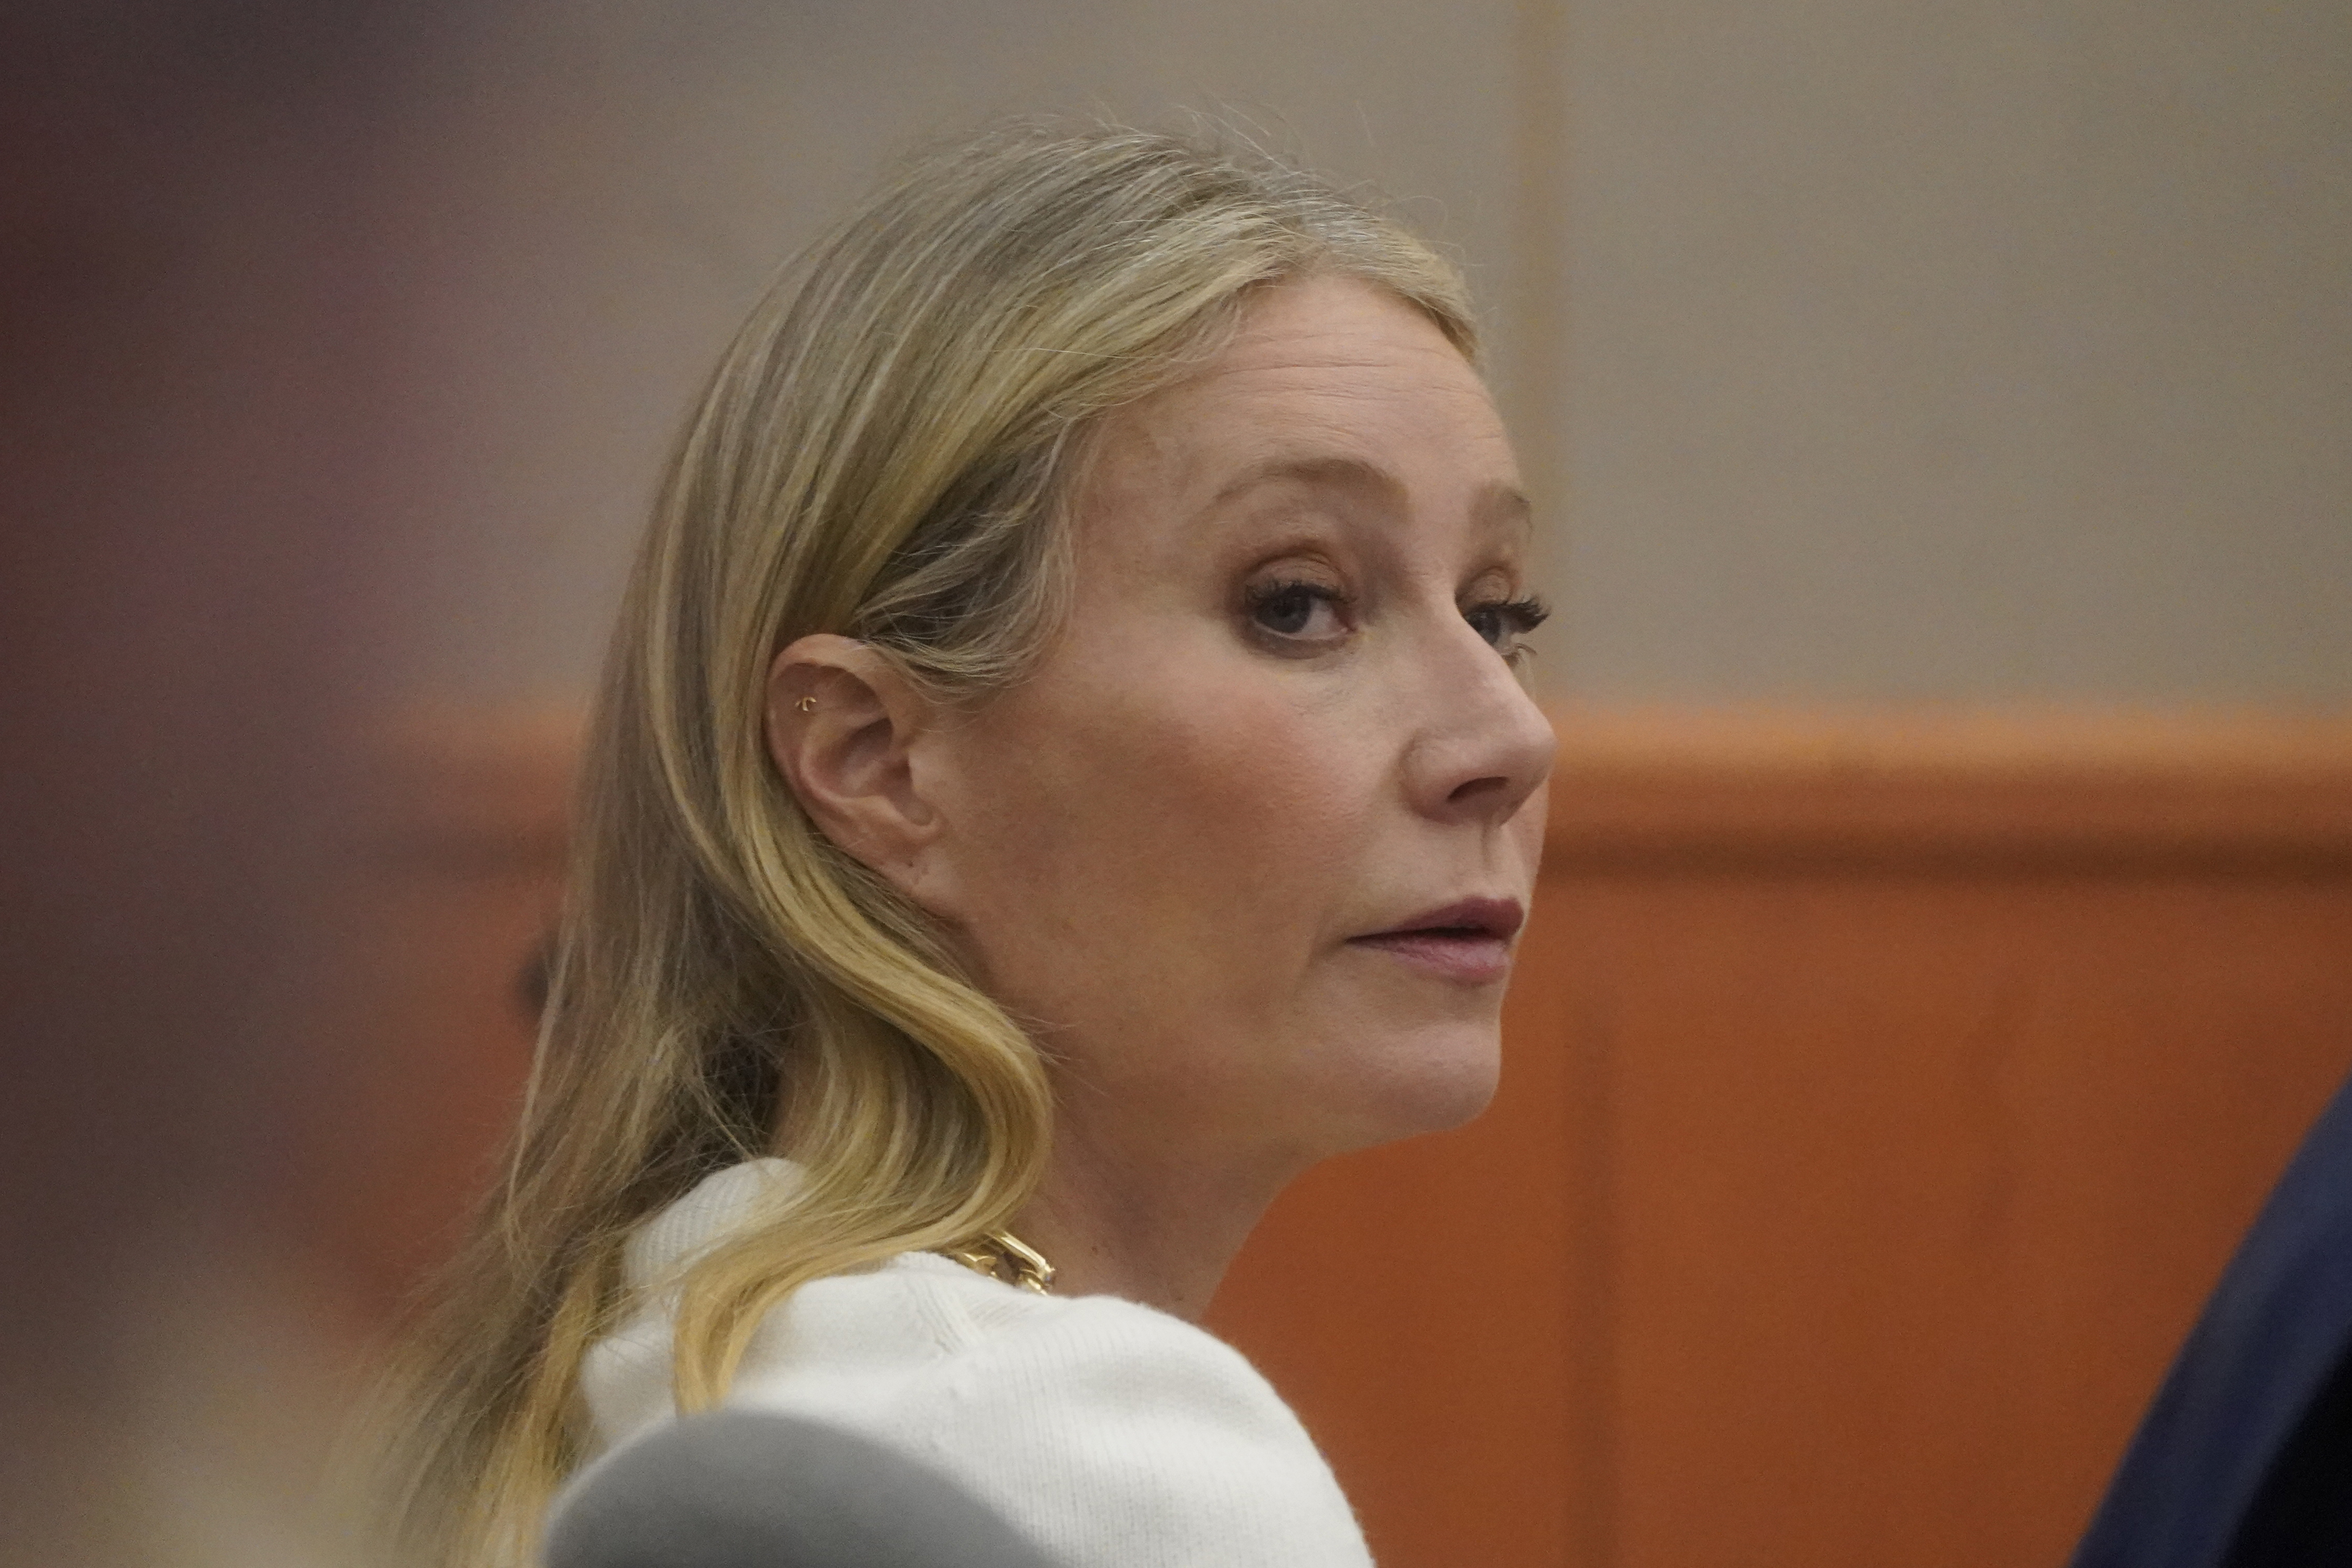 Actor Gwyneth Paltrow looks on as she sits in the courtroom on Wednesday, March 22, 2023, in Park City, Utah.  Doctors and family members are beginning to testify on the second day of trial in Utah